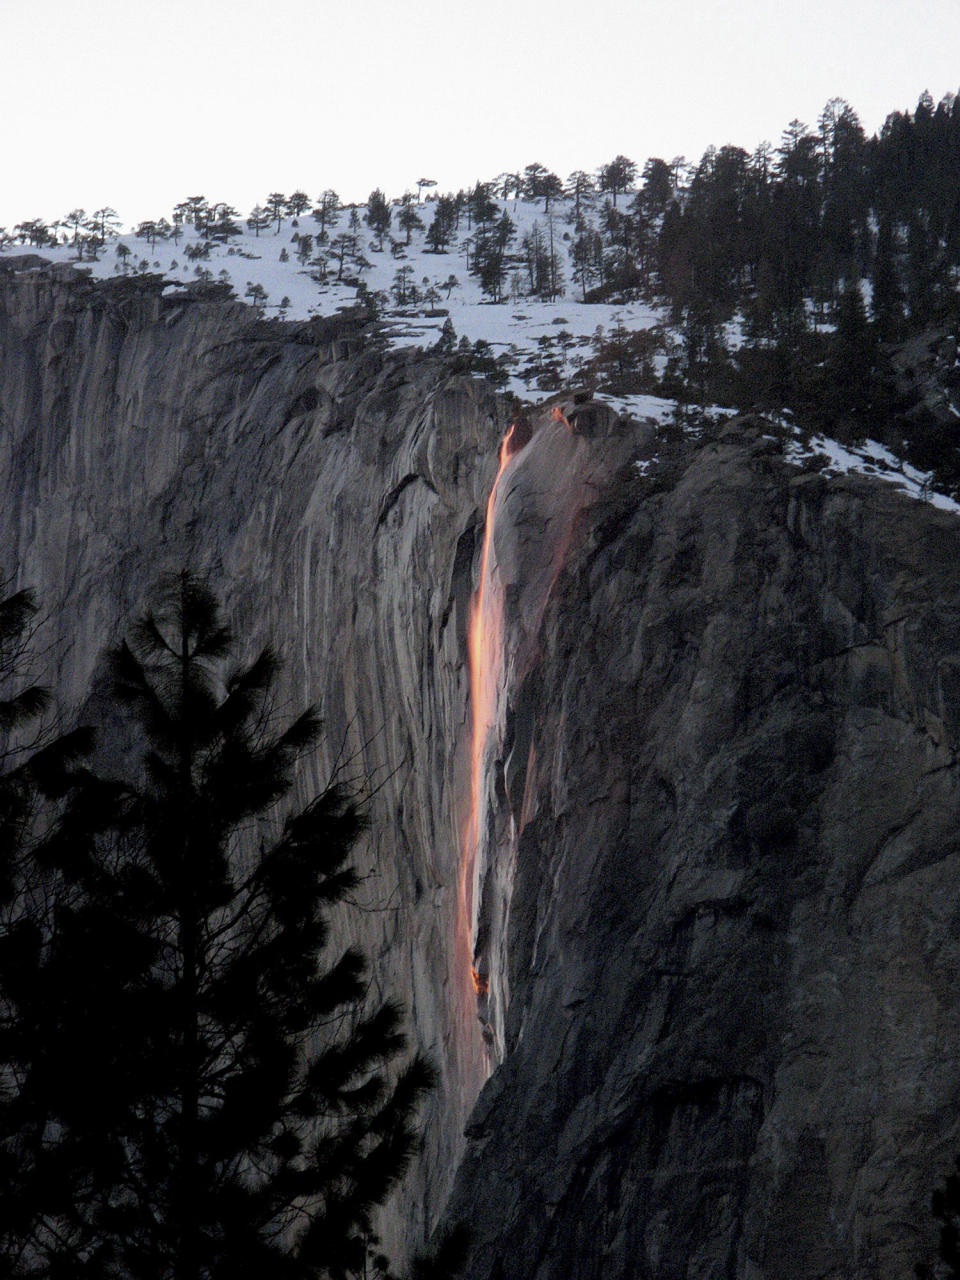 In this undated handout photo provided by the Scott Gediman of the Yosemite National Park Service, the firefall from Glacier Point is shown in Yosemite. A window of time just opened in Yosemite National Park when nature photographers wait, as if for an eclipse, until the moment when the sun and earth align to create a fleeting phenomenon. This marvel of celestial configuration happens in a flash at sunset in mid-February _ if the winter weather cooperates. On those days the setting sun illuminates one of the park's lesser-known waterfalls so precisely that it resembles molten lava as it flows over the sheer granite face of the imposing El Capitan. (AP Handout Photo/Yosemite National Park Service, Bethany Gediman) MUST CREDIT NATIONAL PARK SERVICE